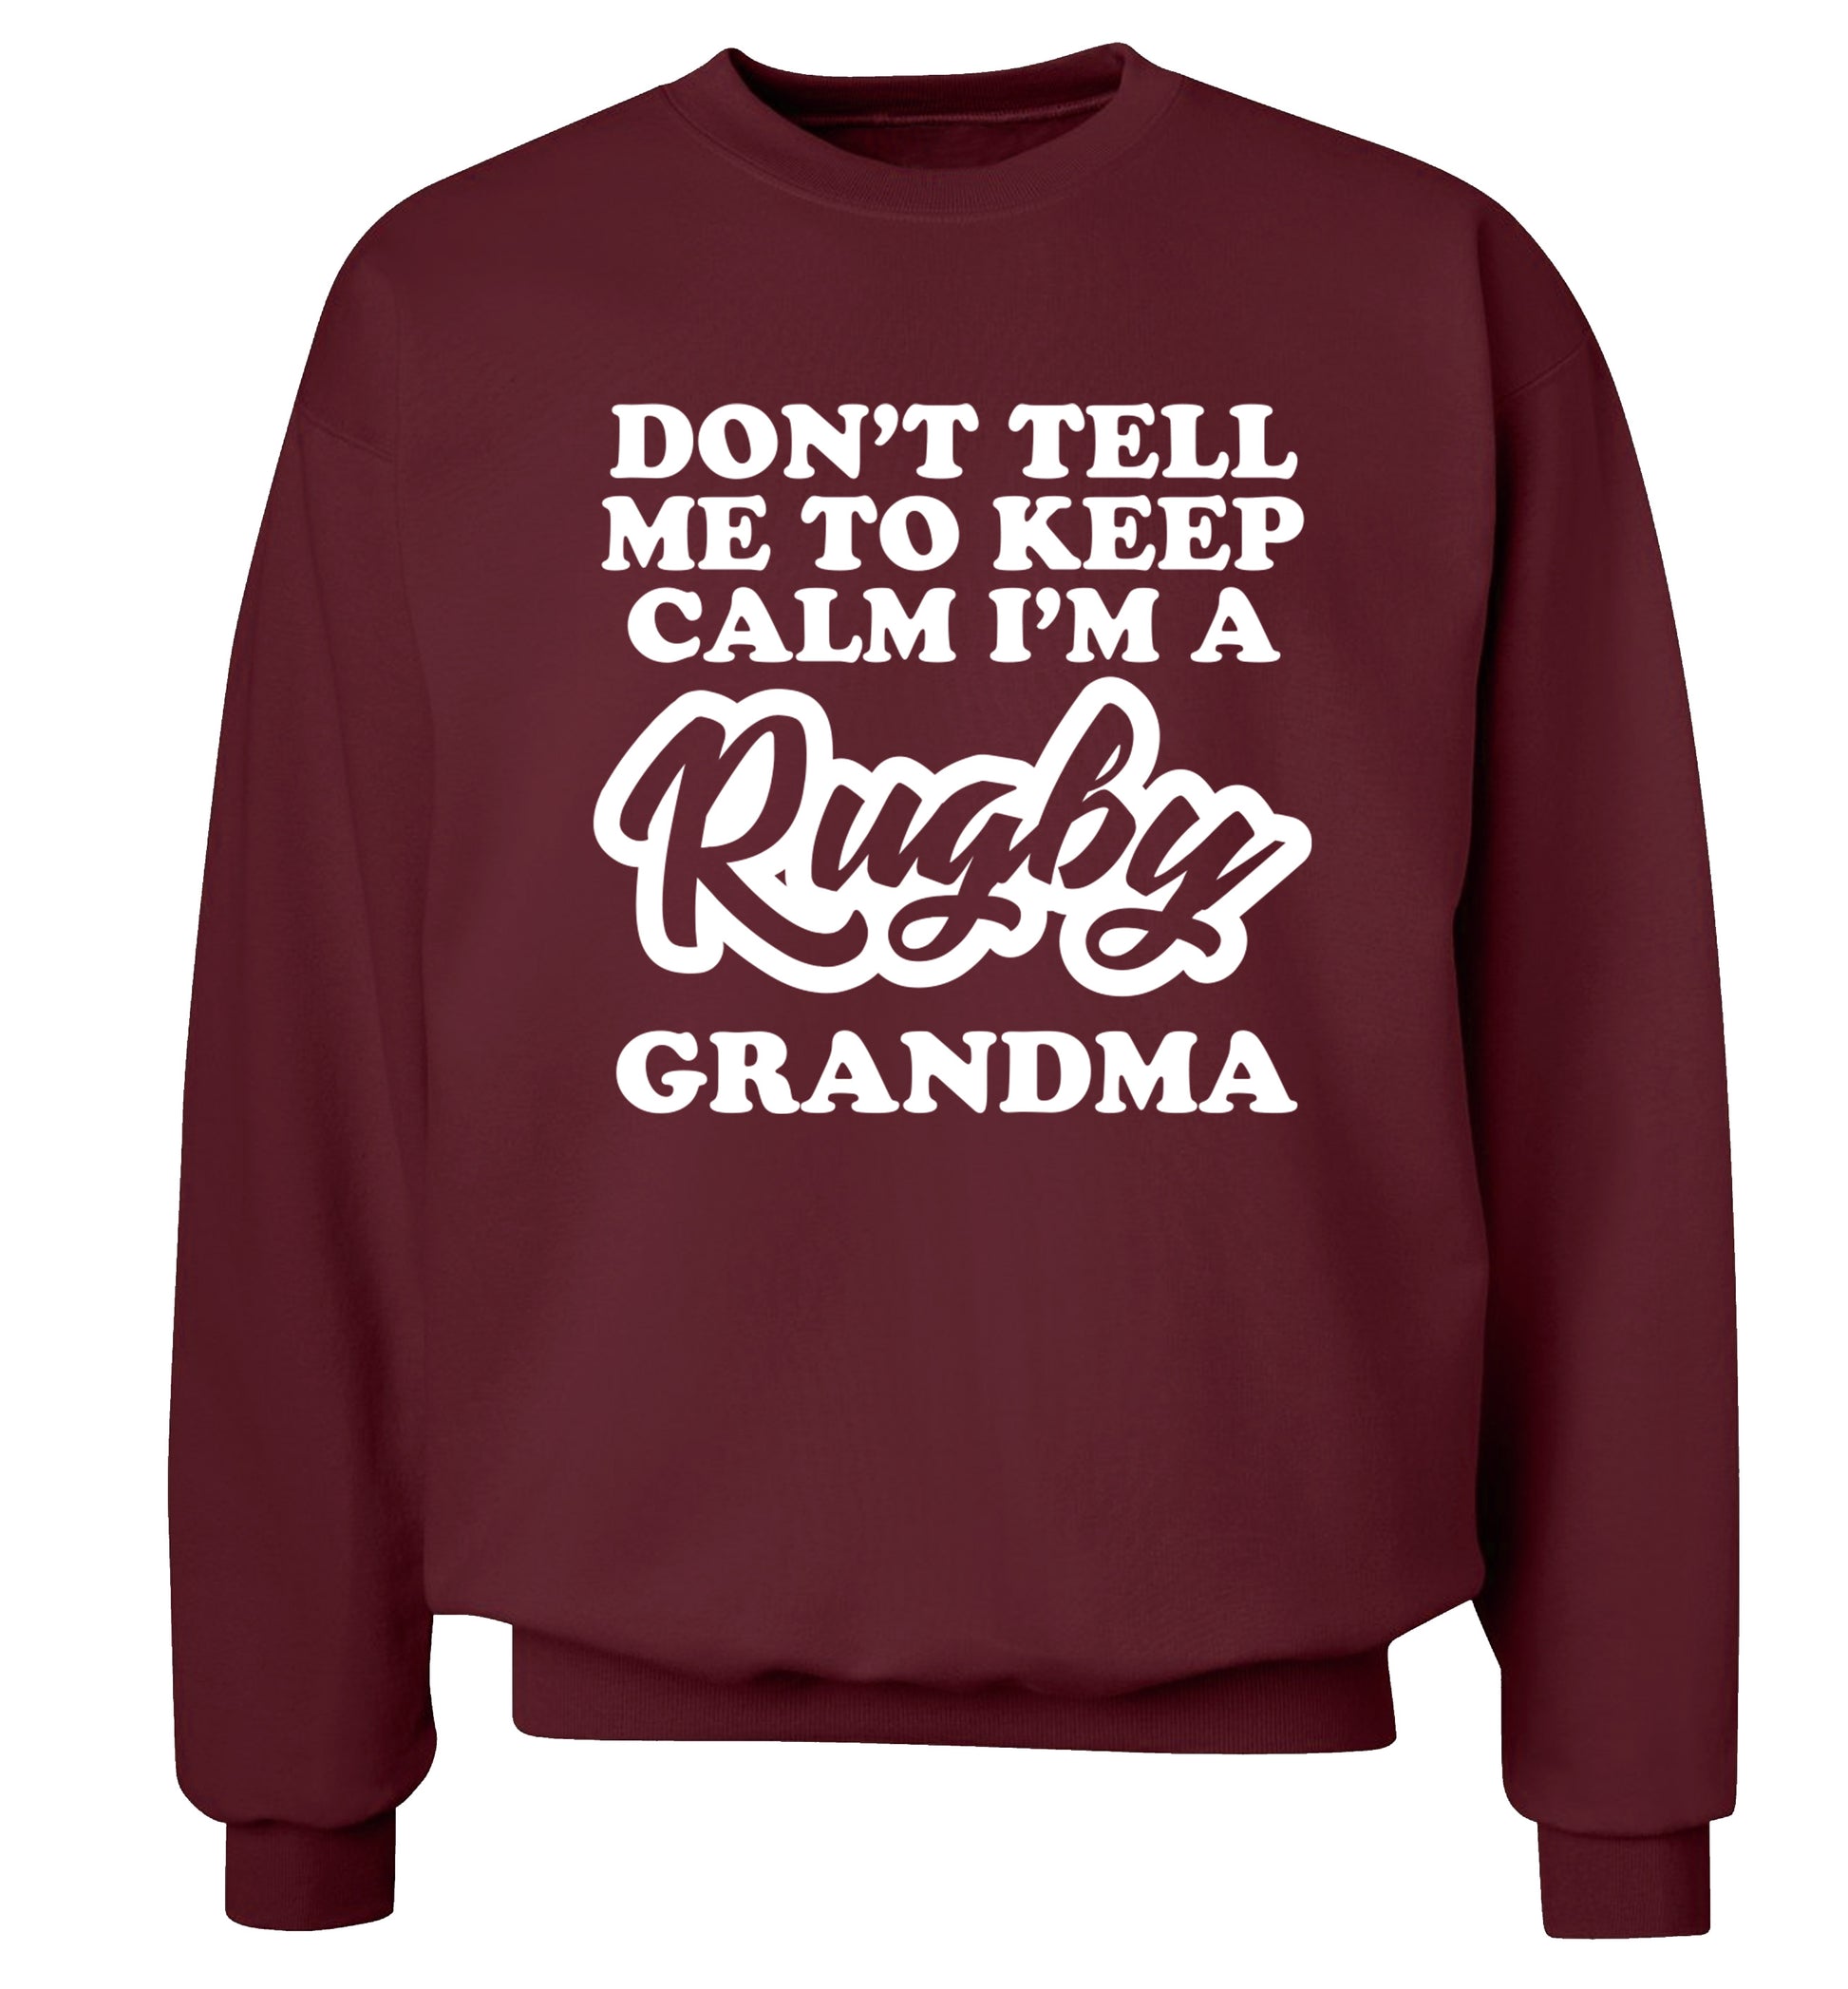 Don't tell me to keep calm I'm a rugby grandma Adult's unisex maroon Sweater 2XL